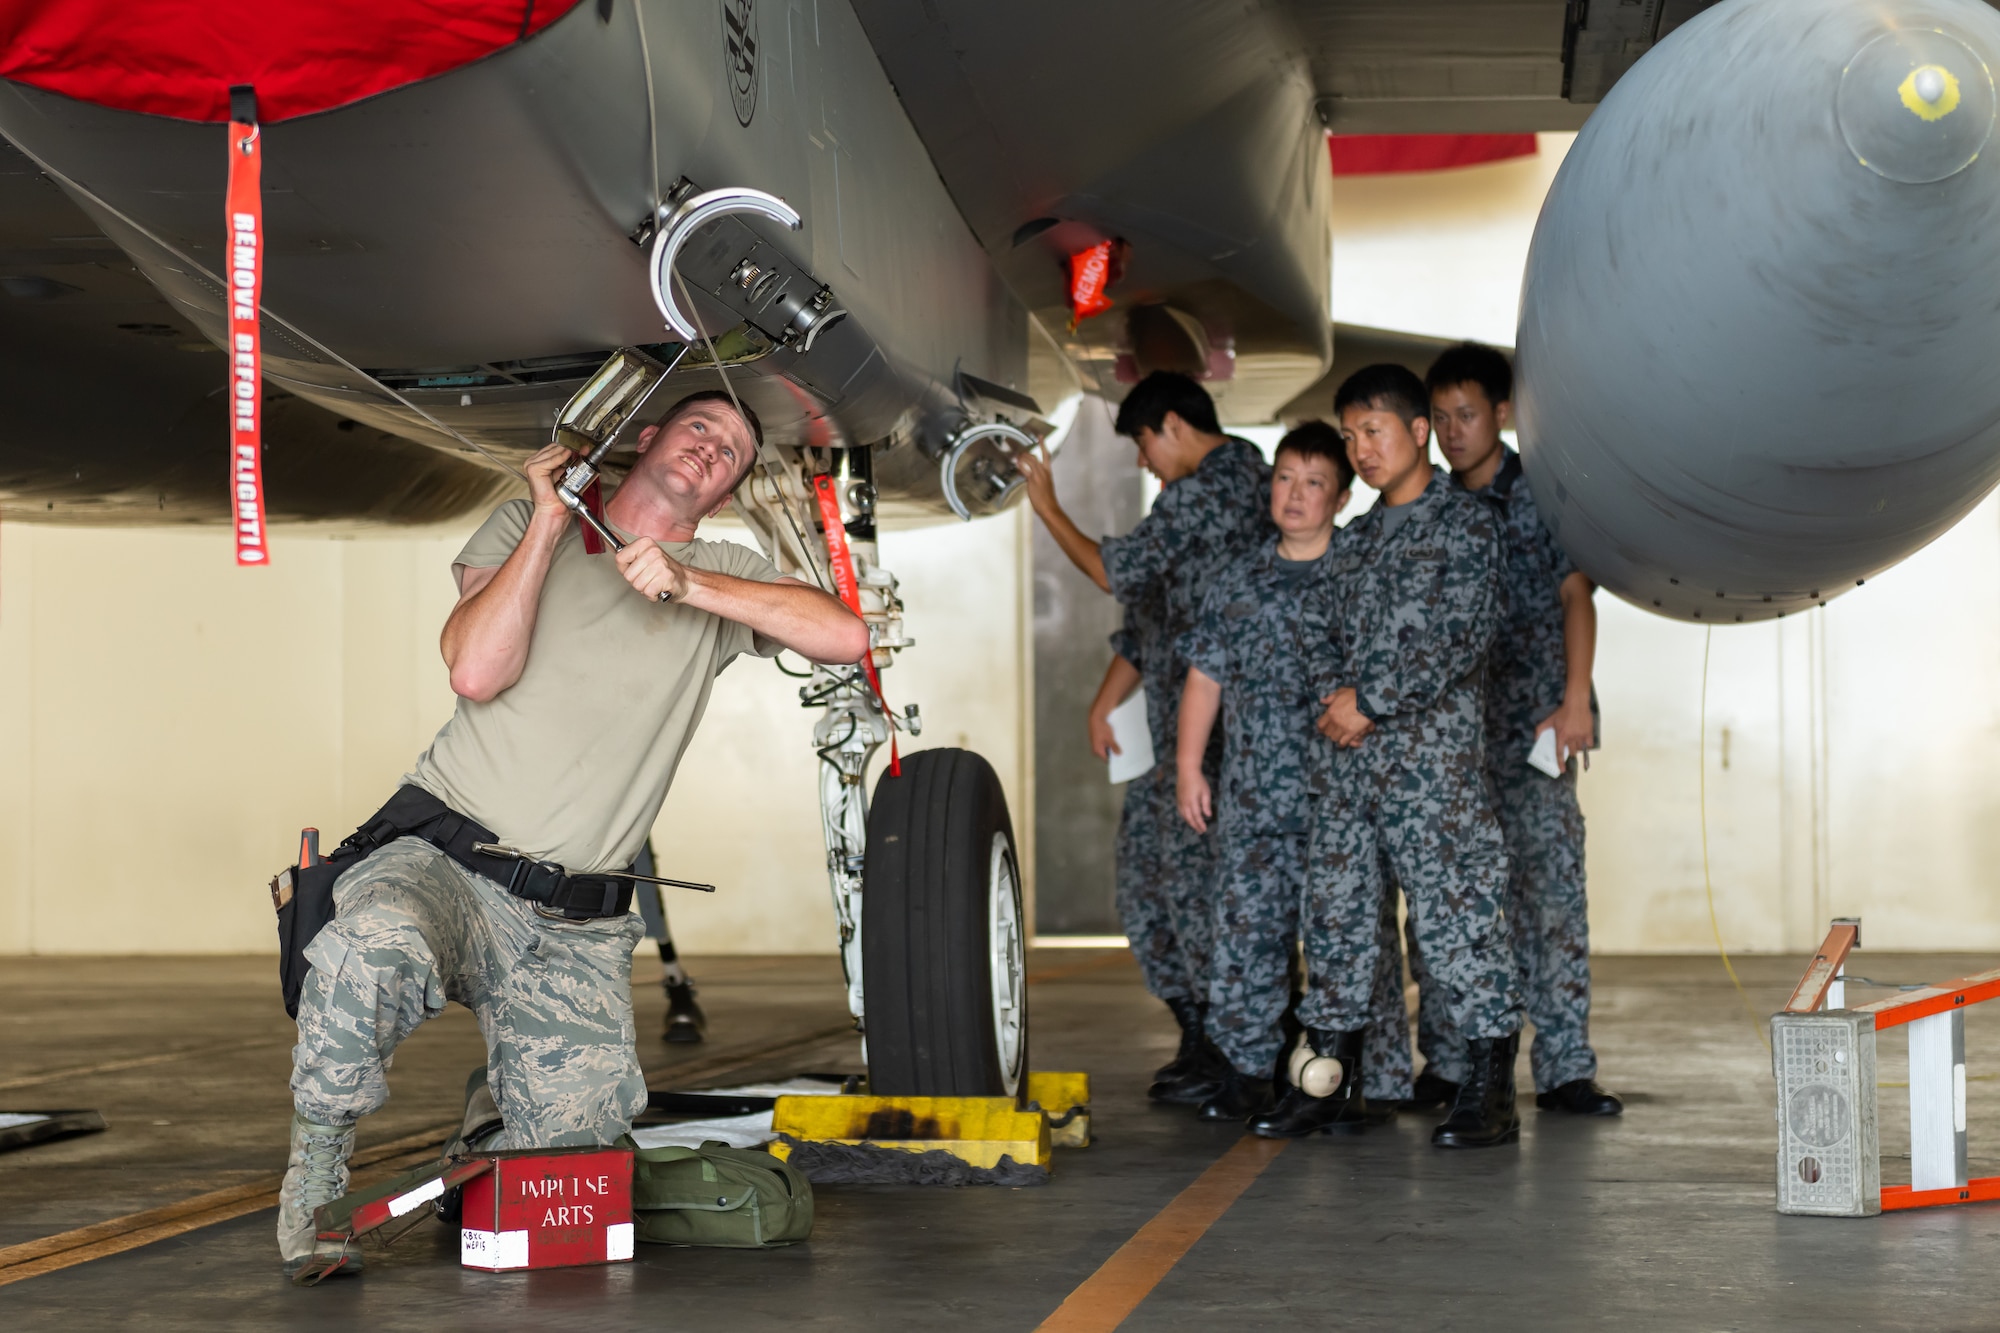 U.S. Air Force Senior Airman Jacob Johnson, 18th Maintenance Group weapons lead crew member, prepares an F-15D Eagle for weapons during the first bilateral weapons load exchange between Kadena Air Base and the Japan Air Self-Defense Force, May 23, 2019. The goal of the training is to accurately and safely load munitions while strengthening the U.S.-Japan alliance in order to secure a free-and-open Indo-Pacific. (U.S. Air Force photo by Airman 1st Class Matthew Seefeldt)